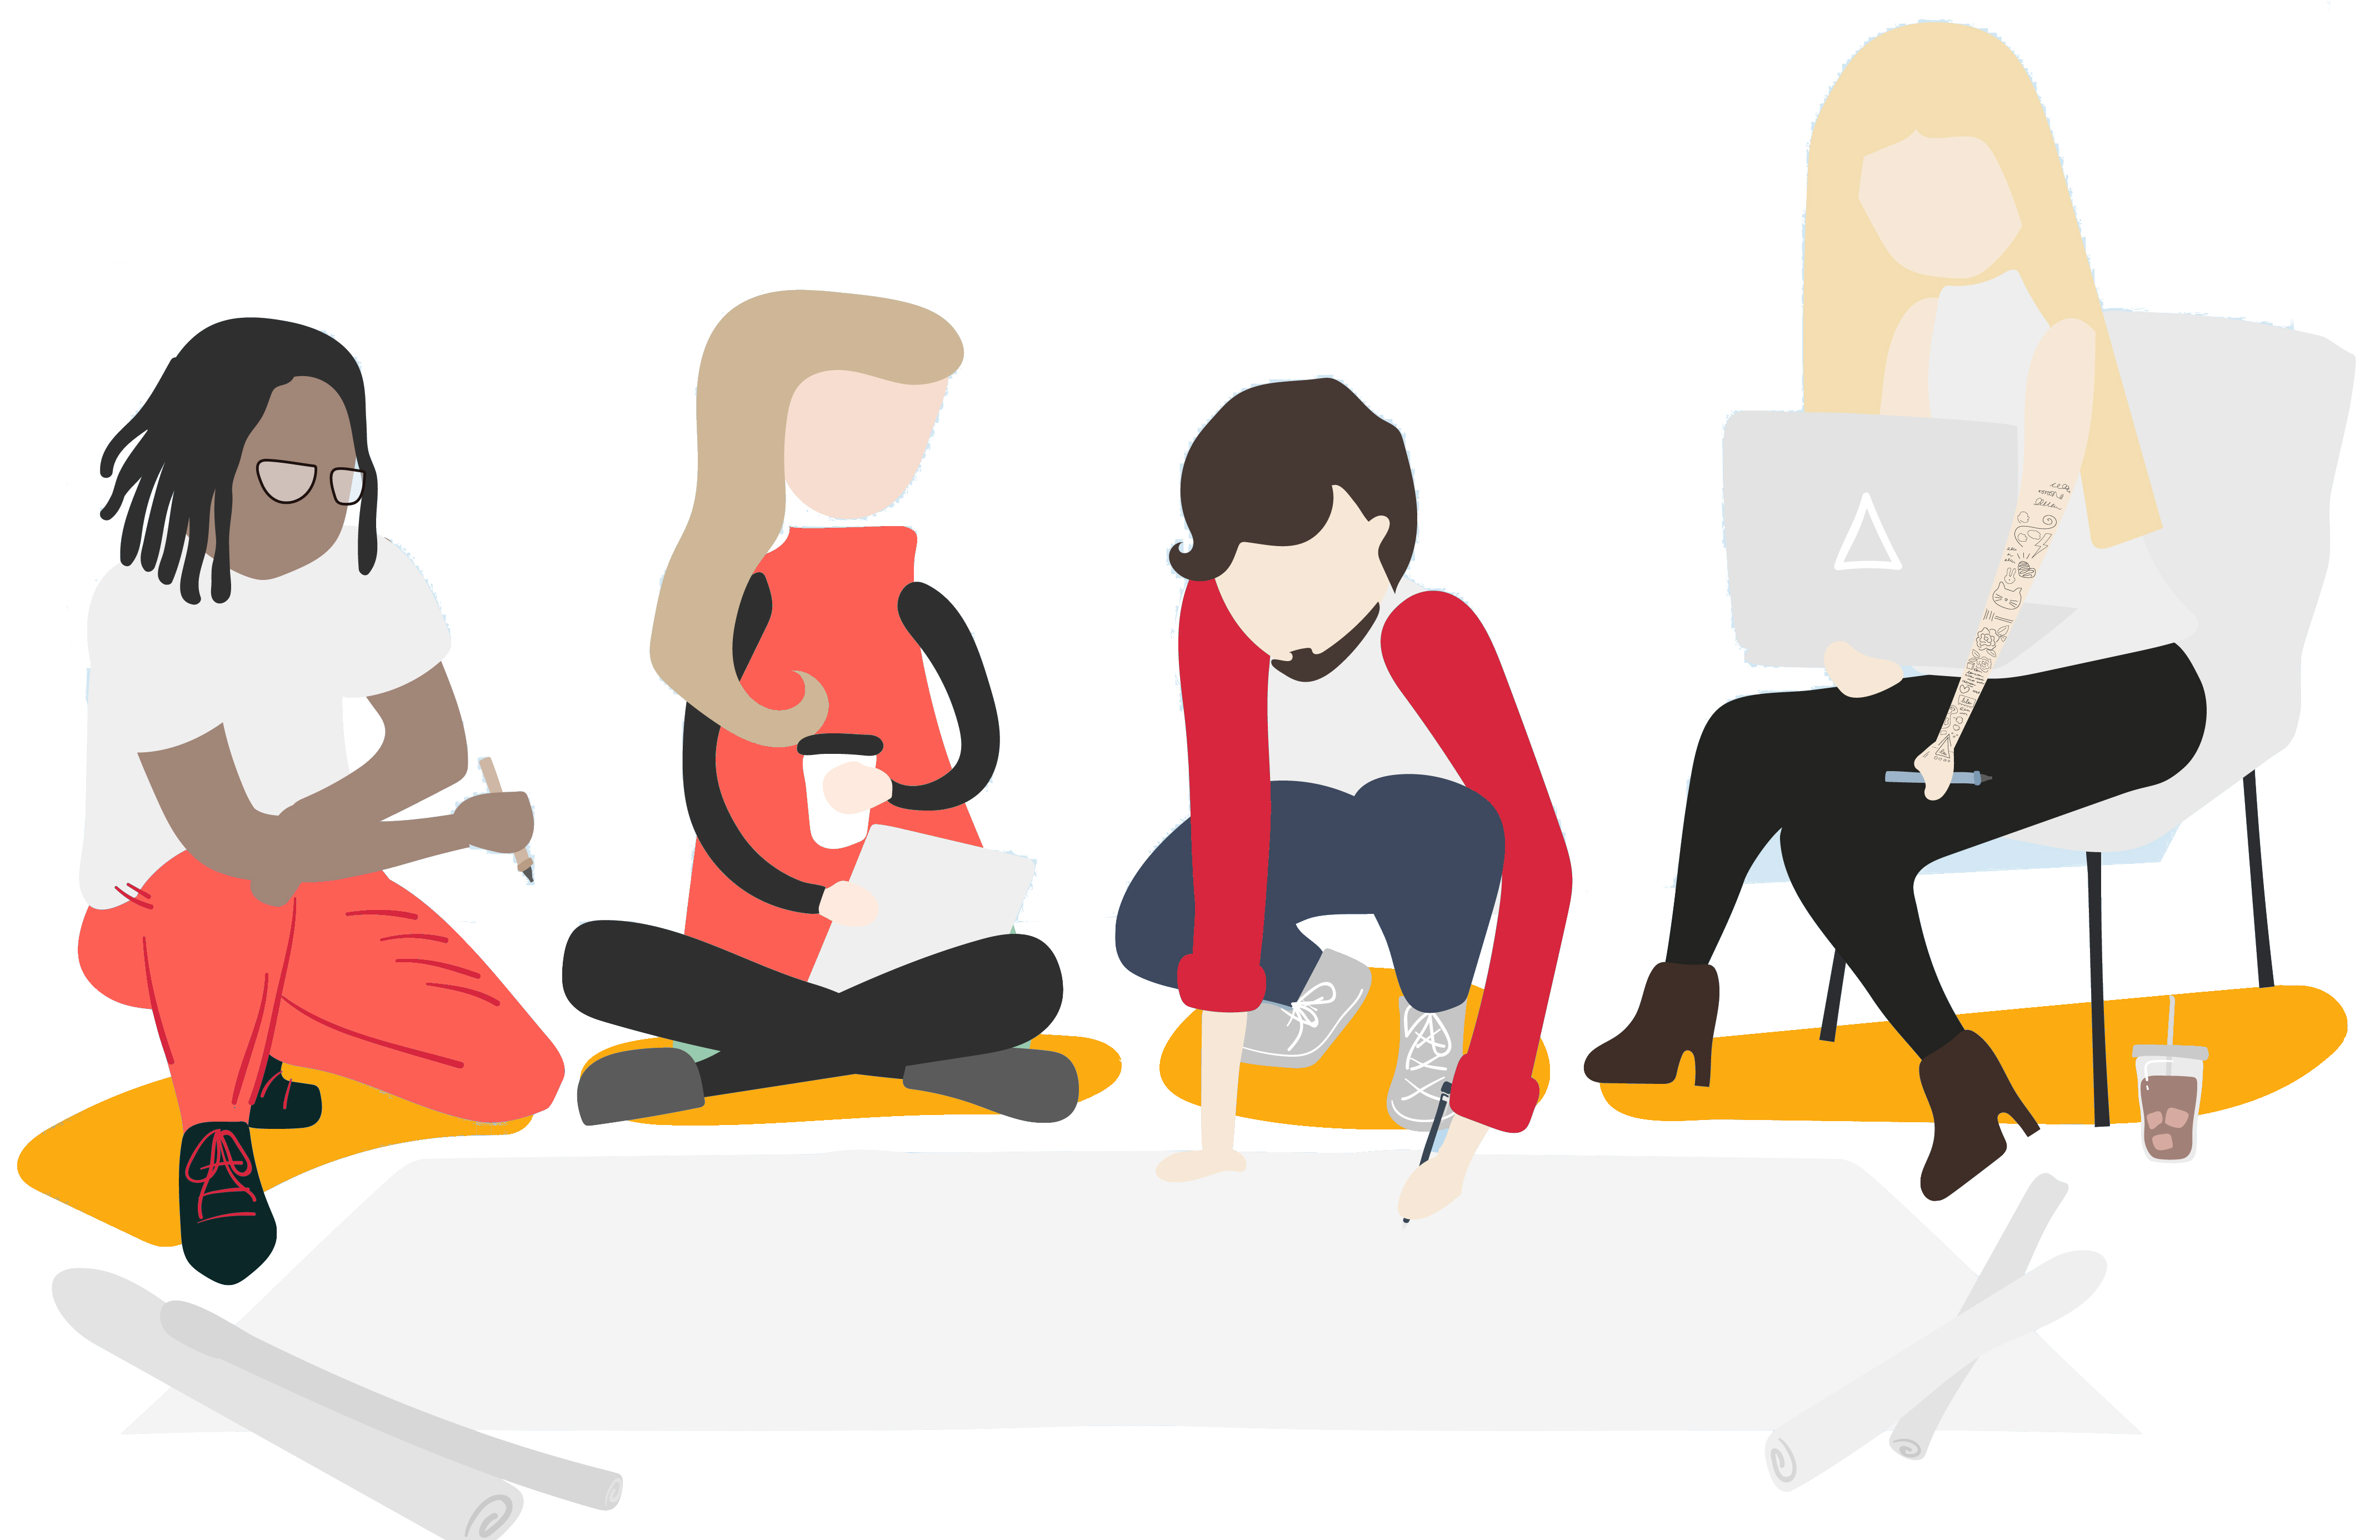 illustration of people sitting in group on the floor